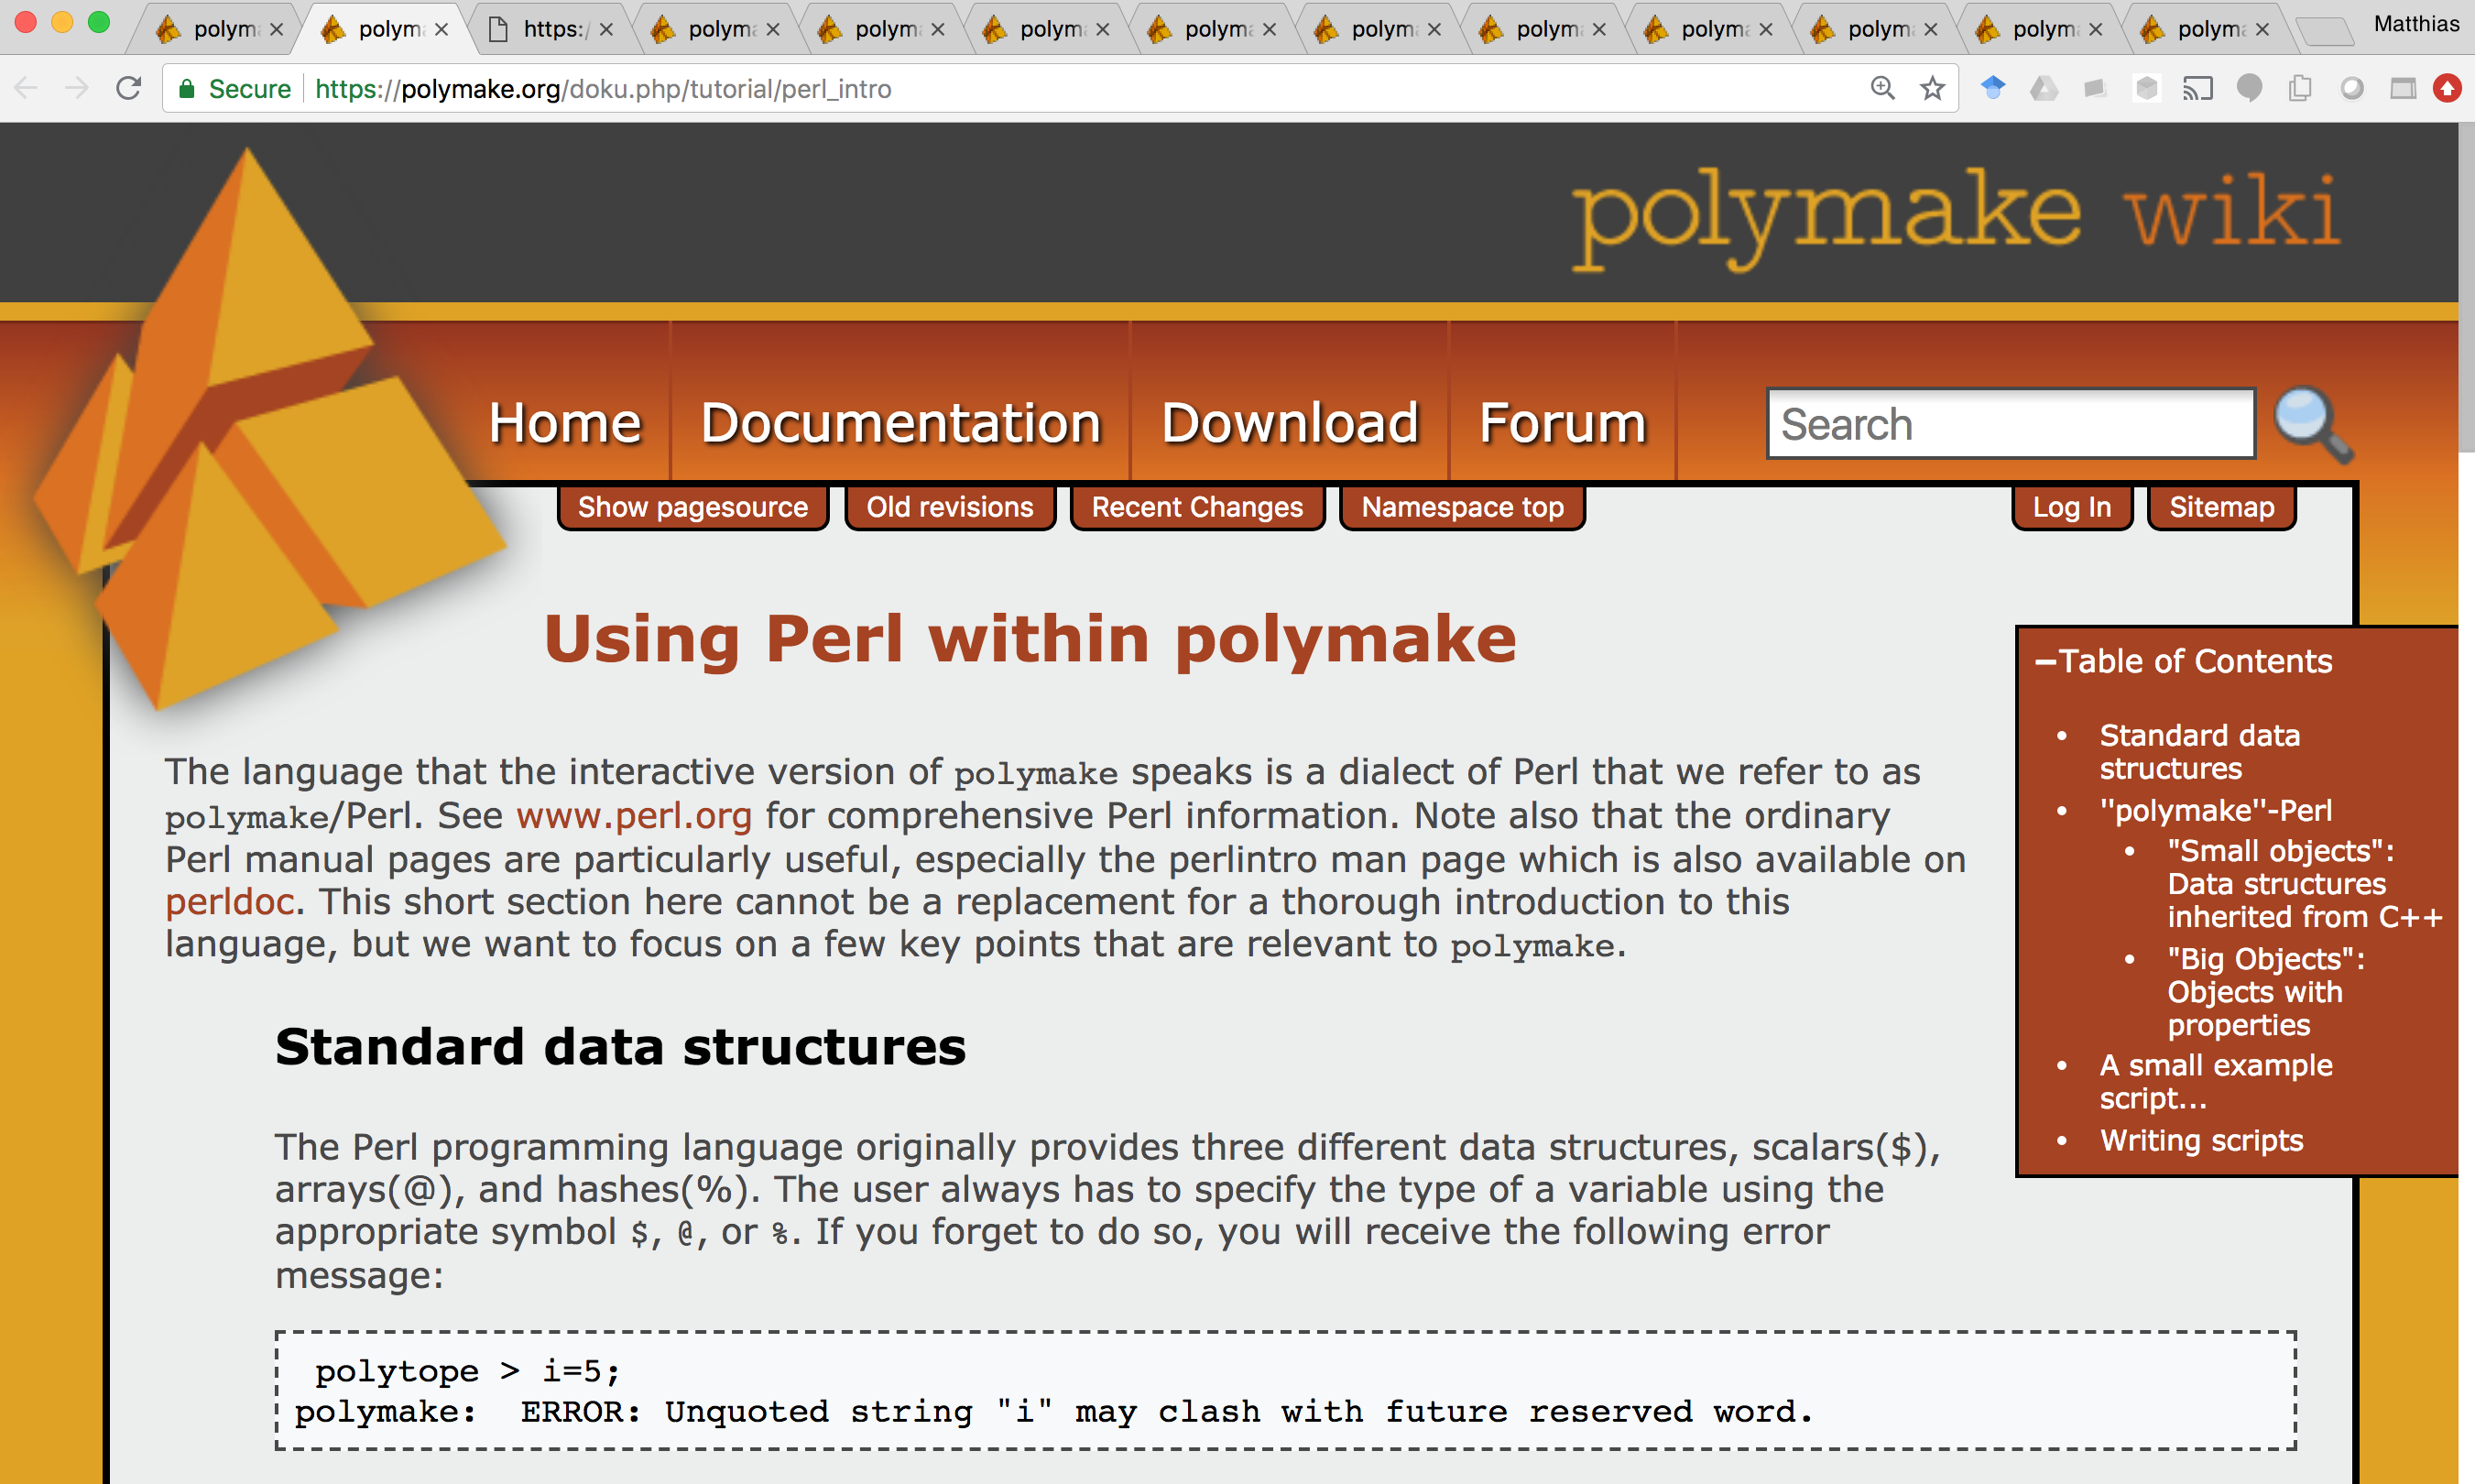 _images/polymake-tutorial-perl-intro-1.png